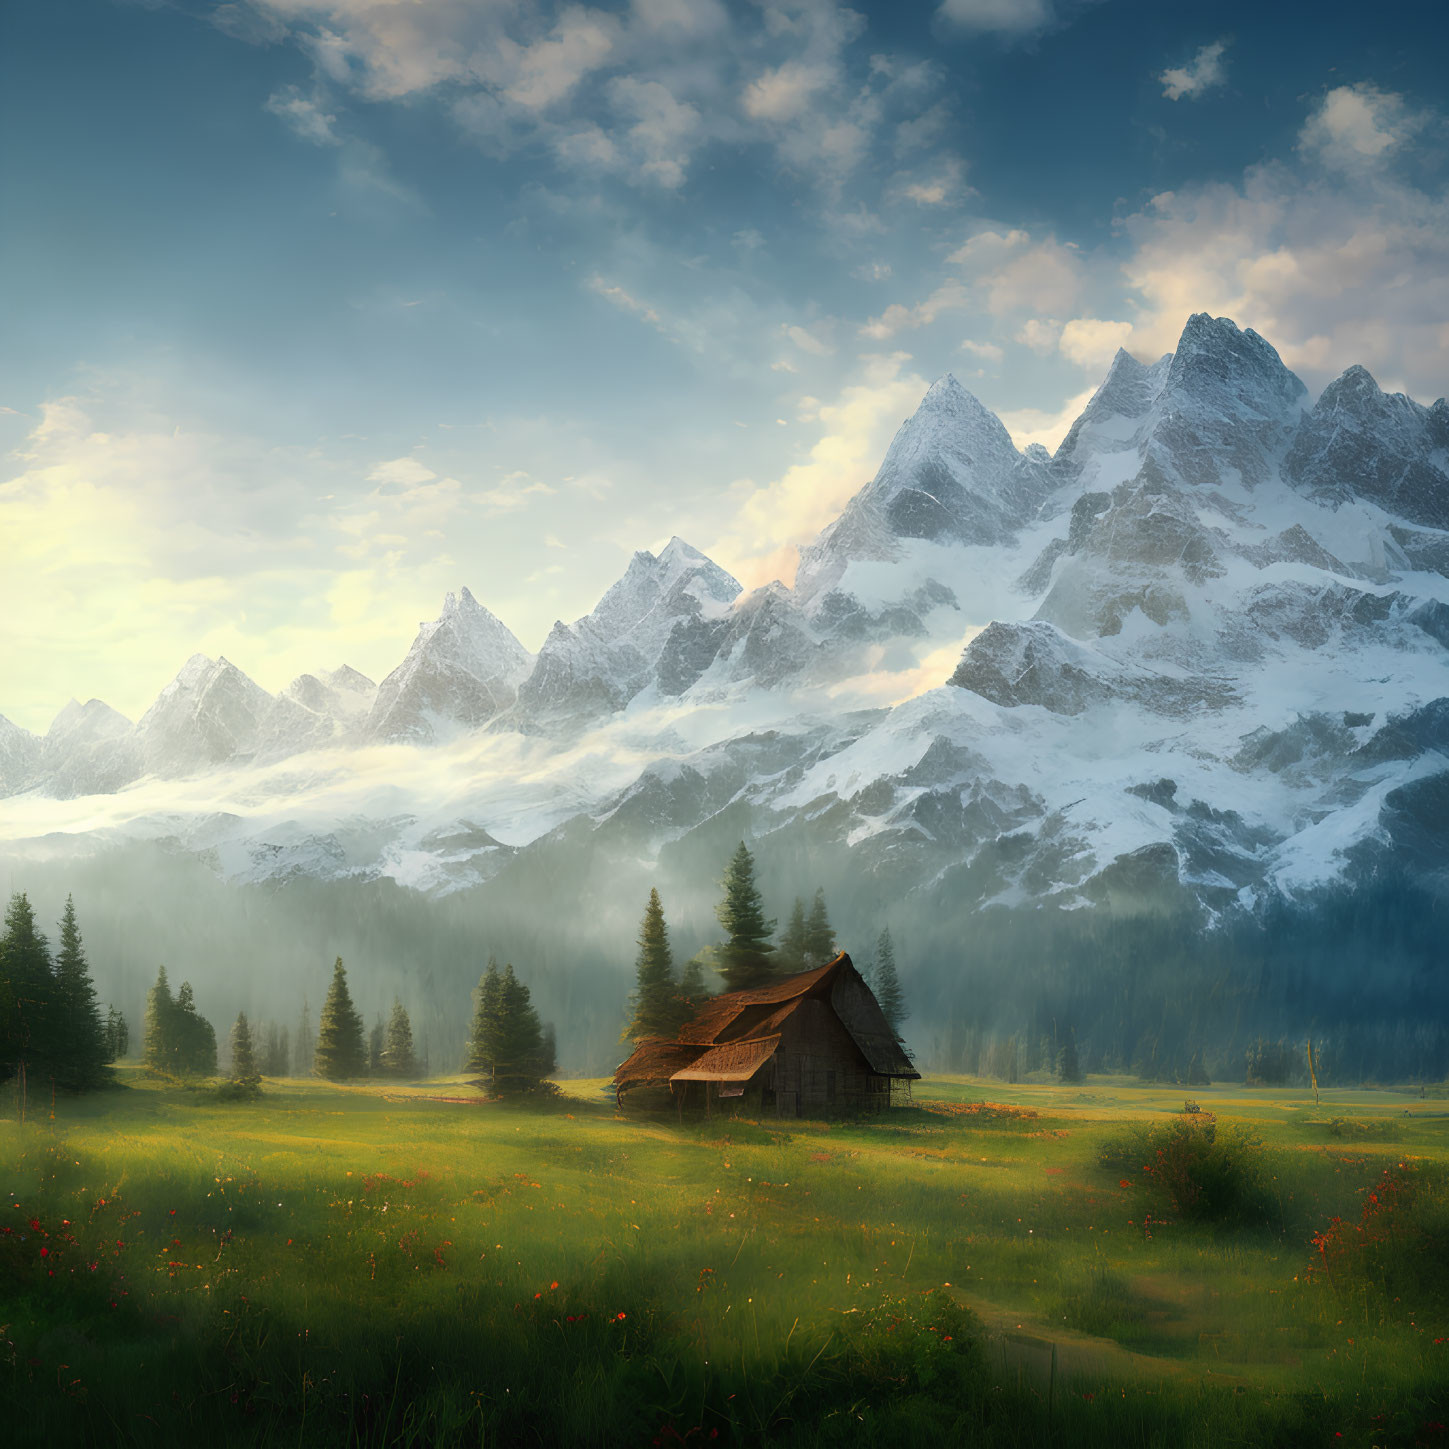 Serene landscape with wooden cabin, pine trees, snow-capped mountains, and glowing sunrise